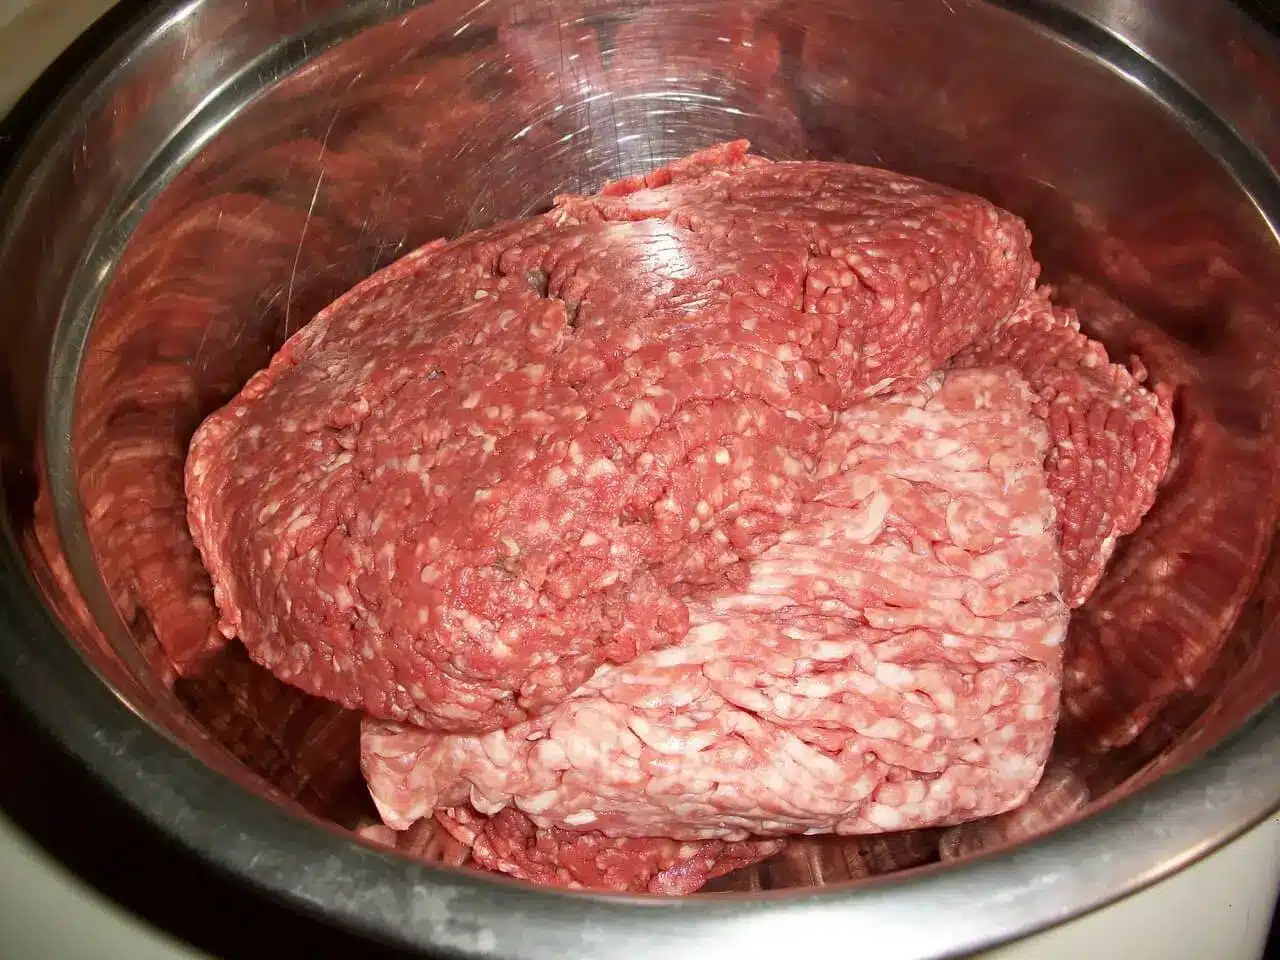 Explore whether you should rinse ground beef after cooking. Get expert insights and tips for flavorful, safe ground beef preparation